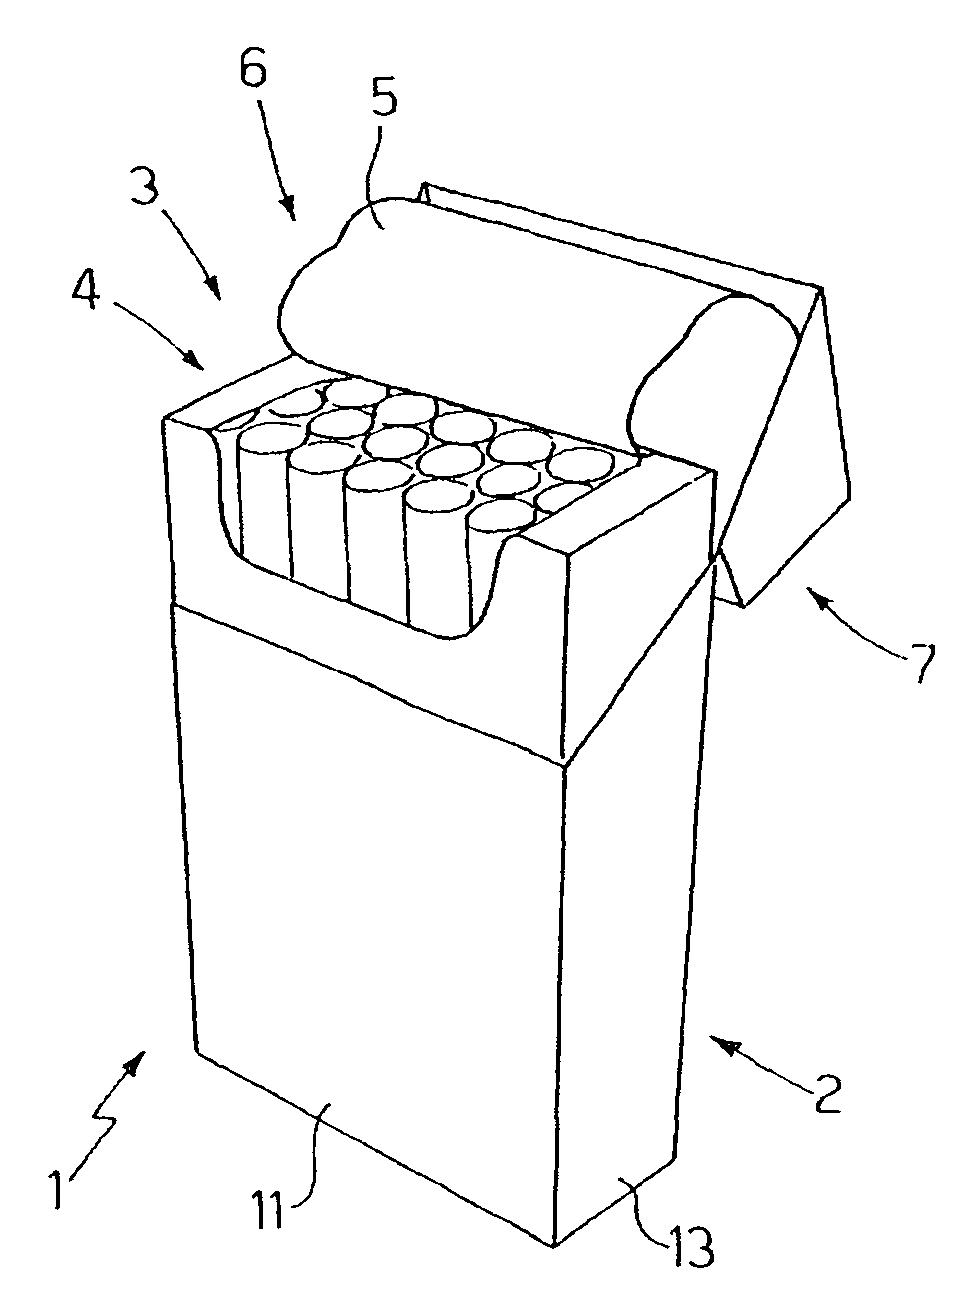 Package of Tobacco Articles Having an Inner Package with a Cover Flap Fixed to a Hinged Lid